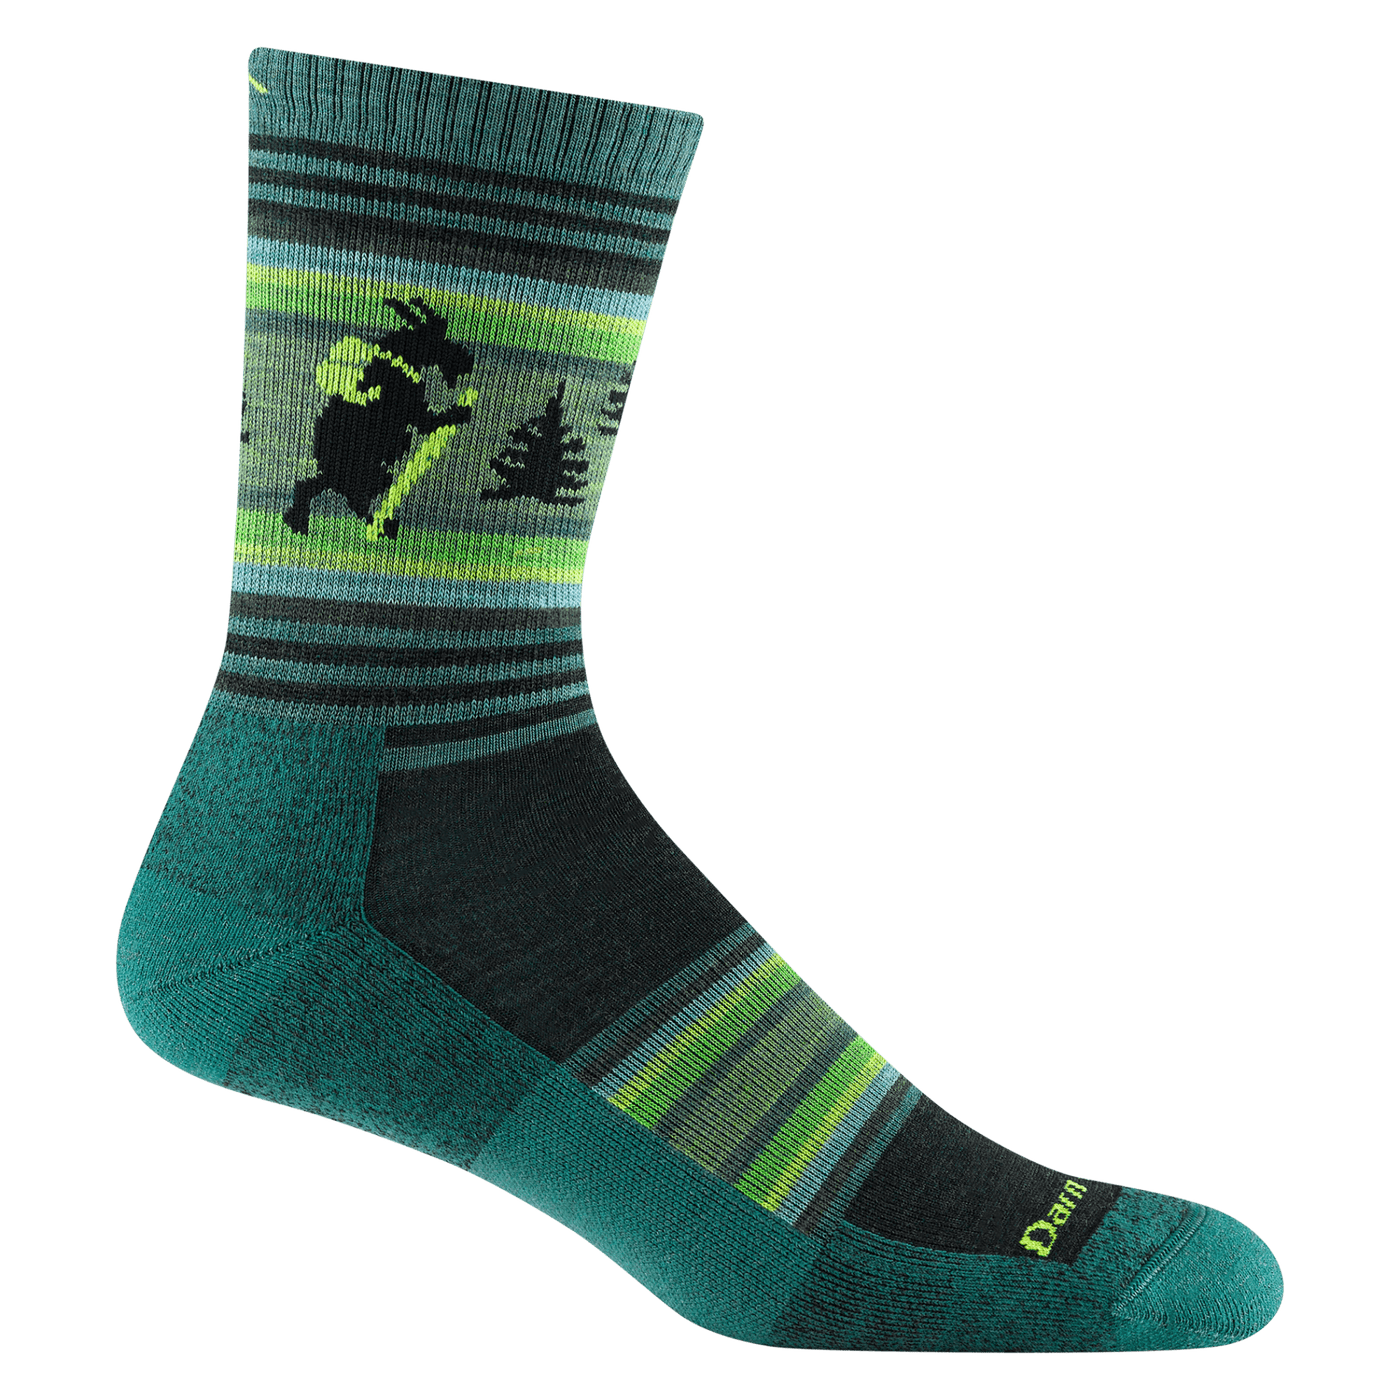 Willoughby Men's Lightweight Micro Crew with Cushion #5003 - Darn Tough - The Sock Monster